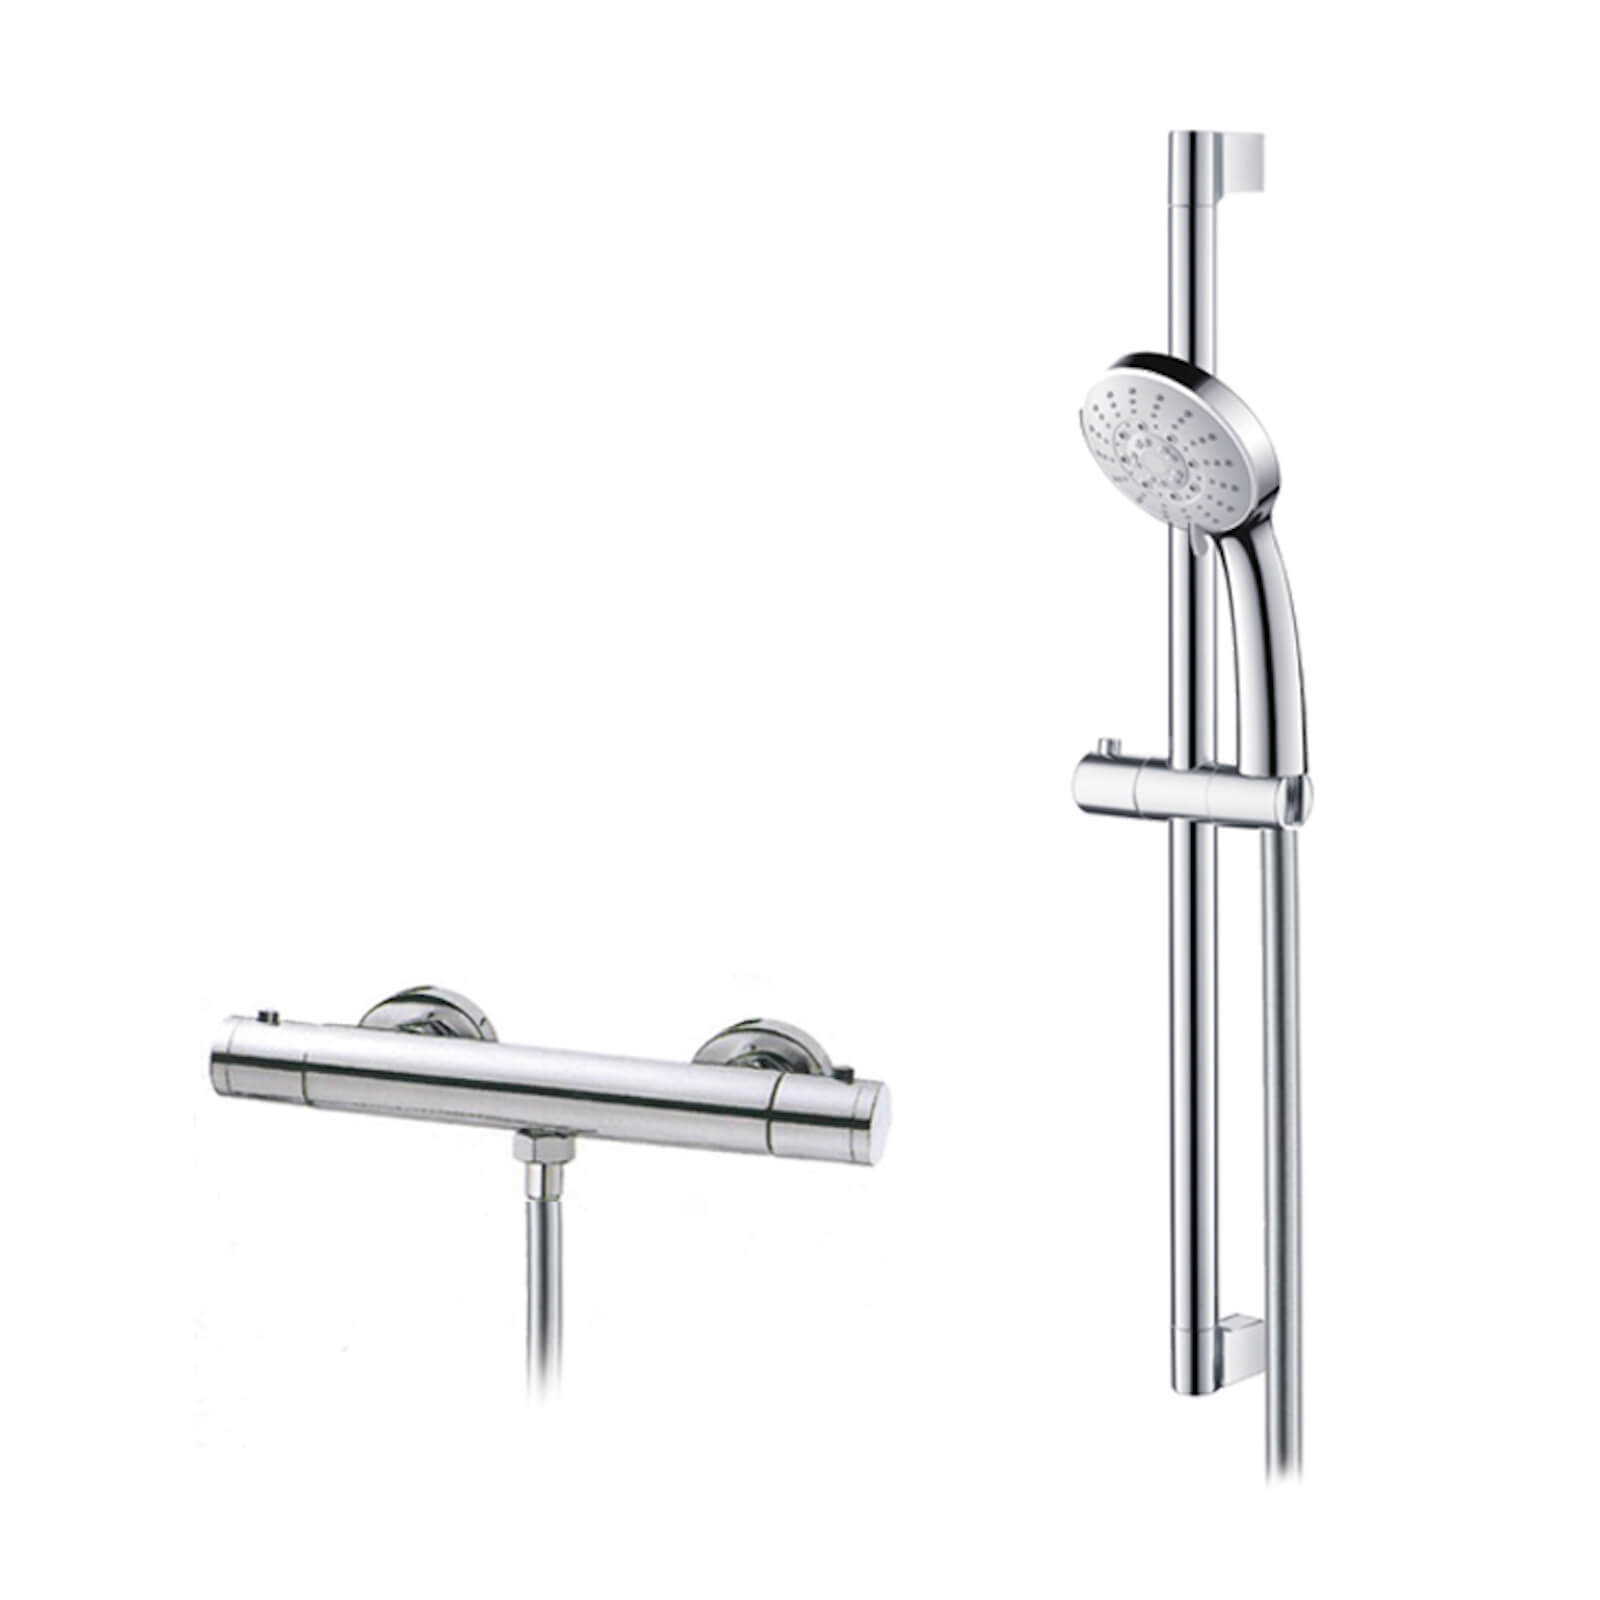 Wetrooms2Go Exposed Thermoshower and Riser Rail Kit